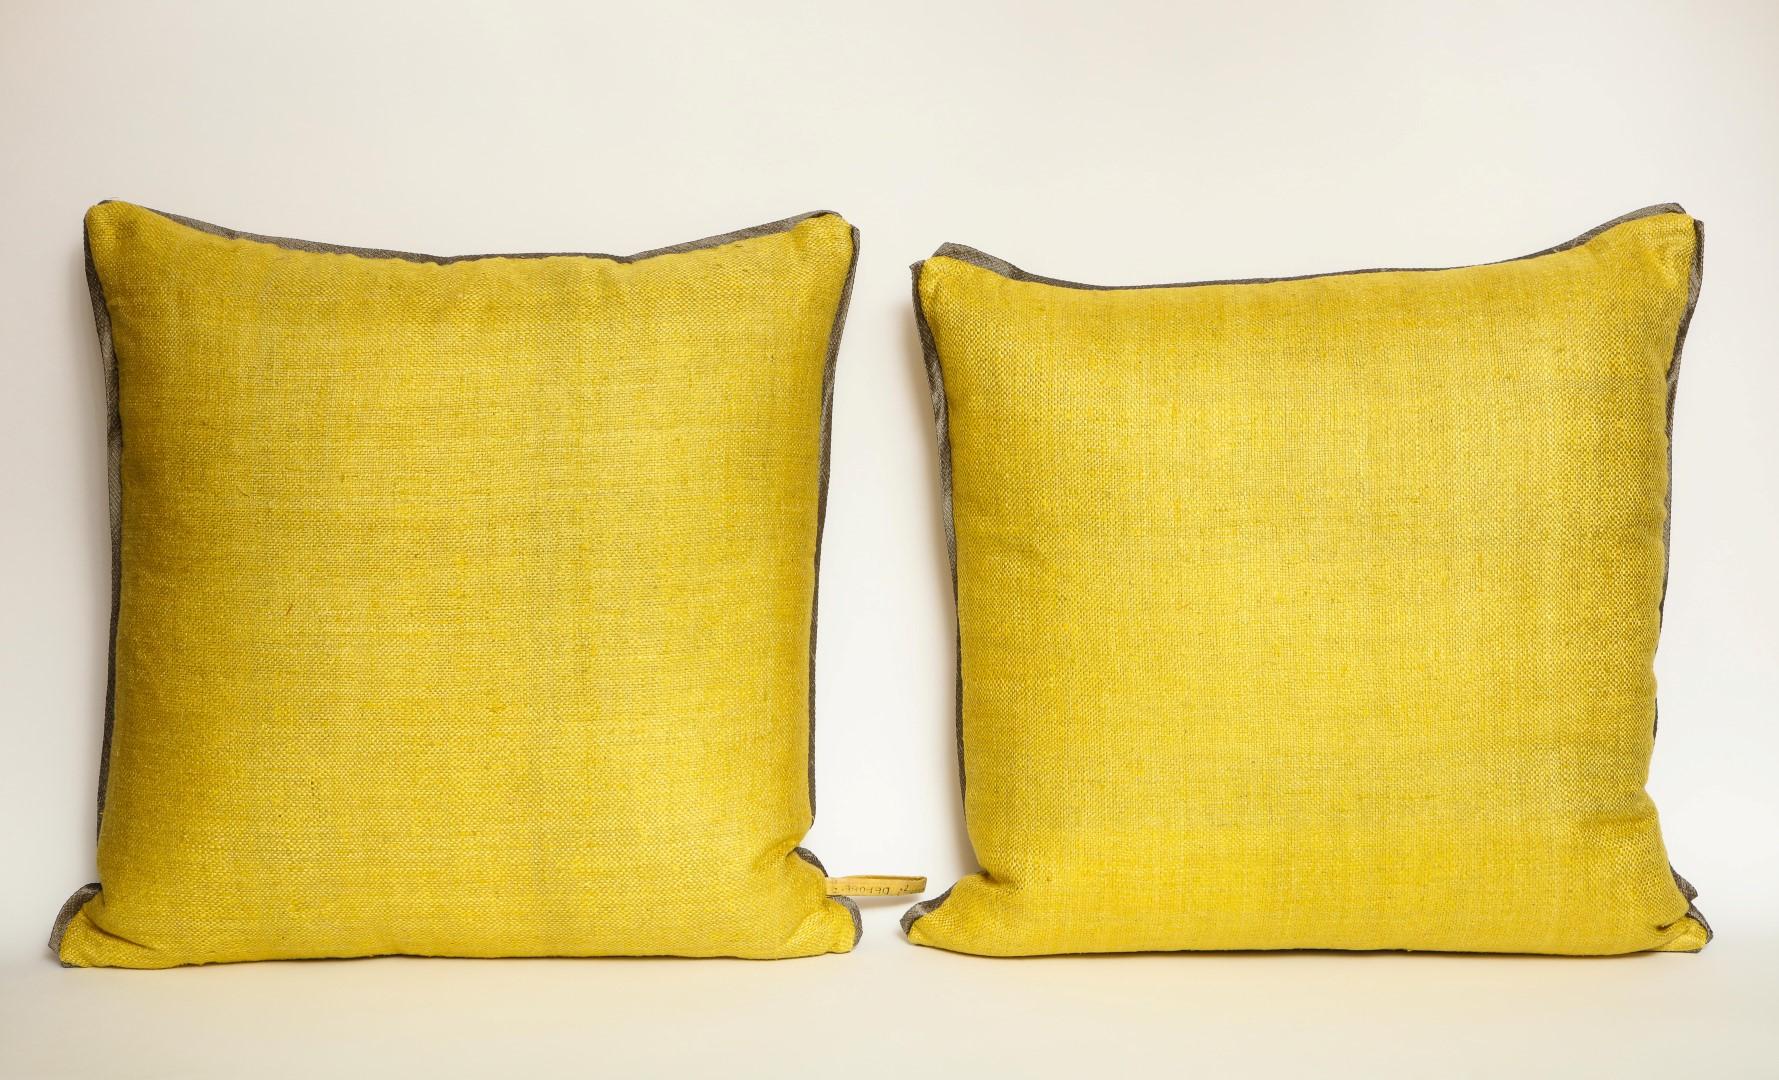 Contemporary Fortuny Fabric Cushions in the Impero Pattern